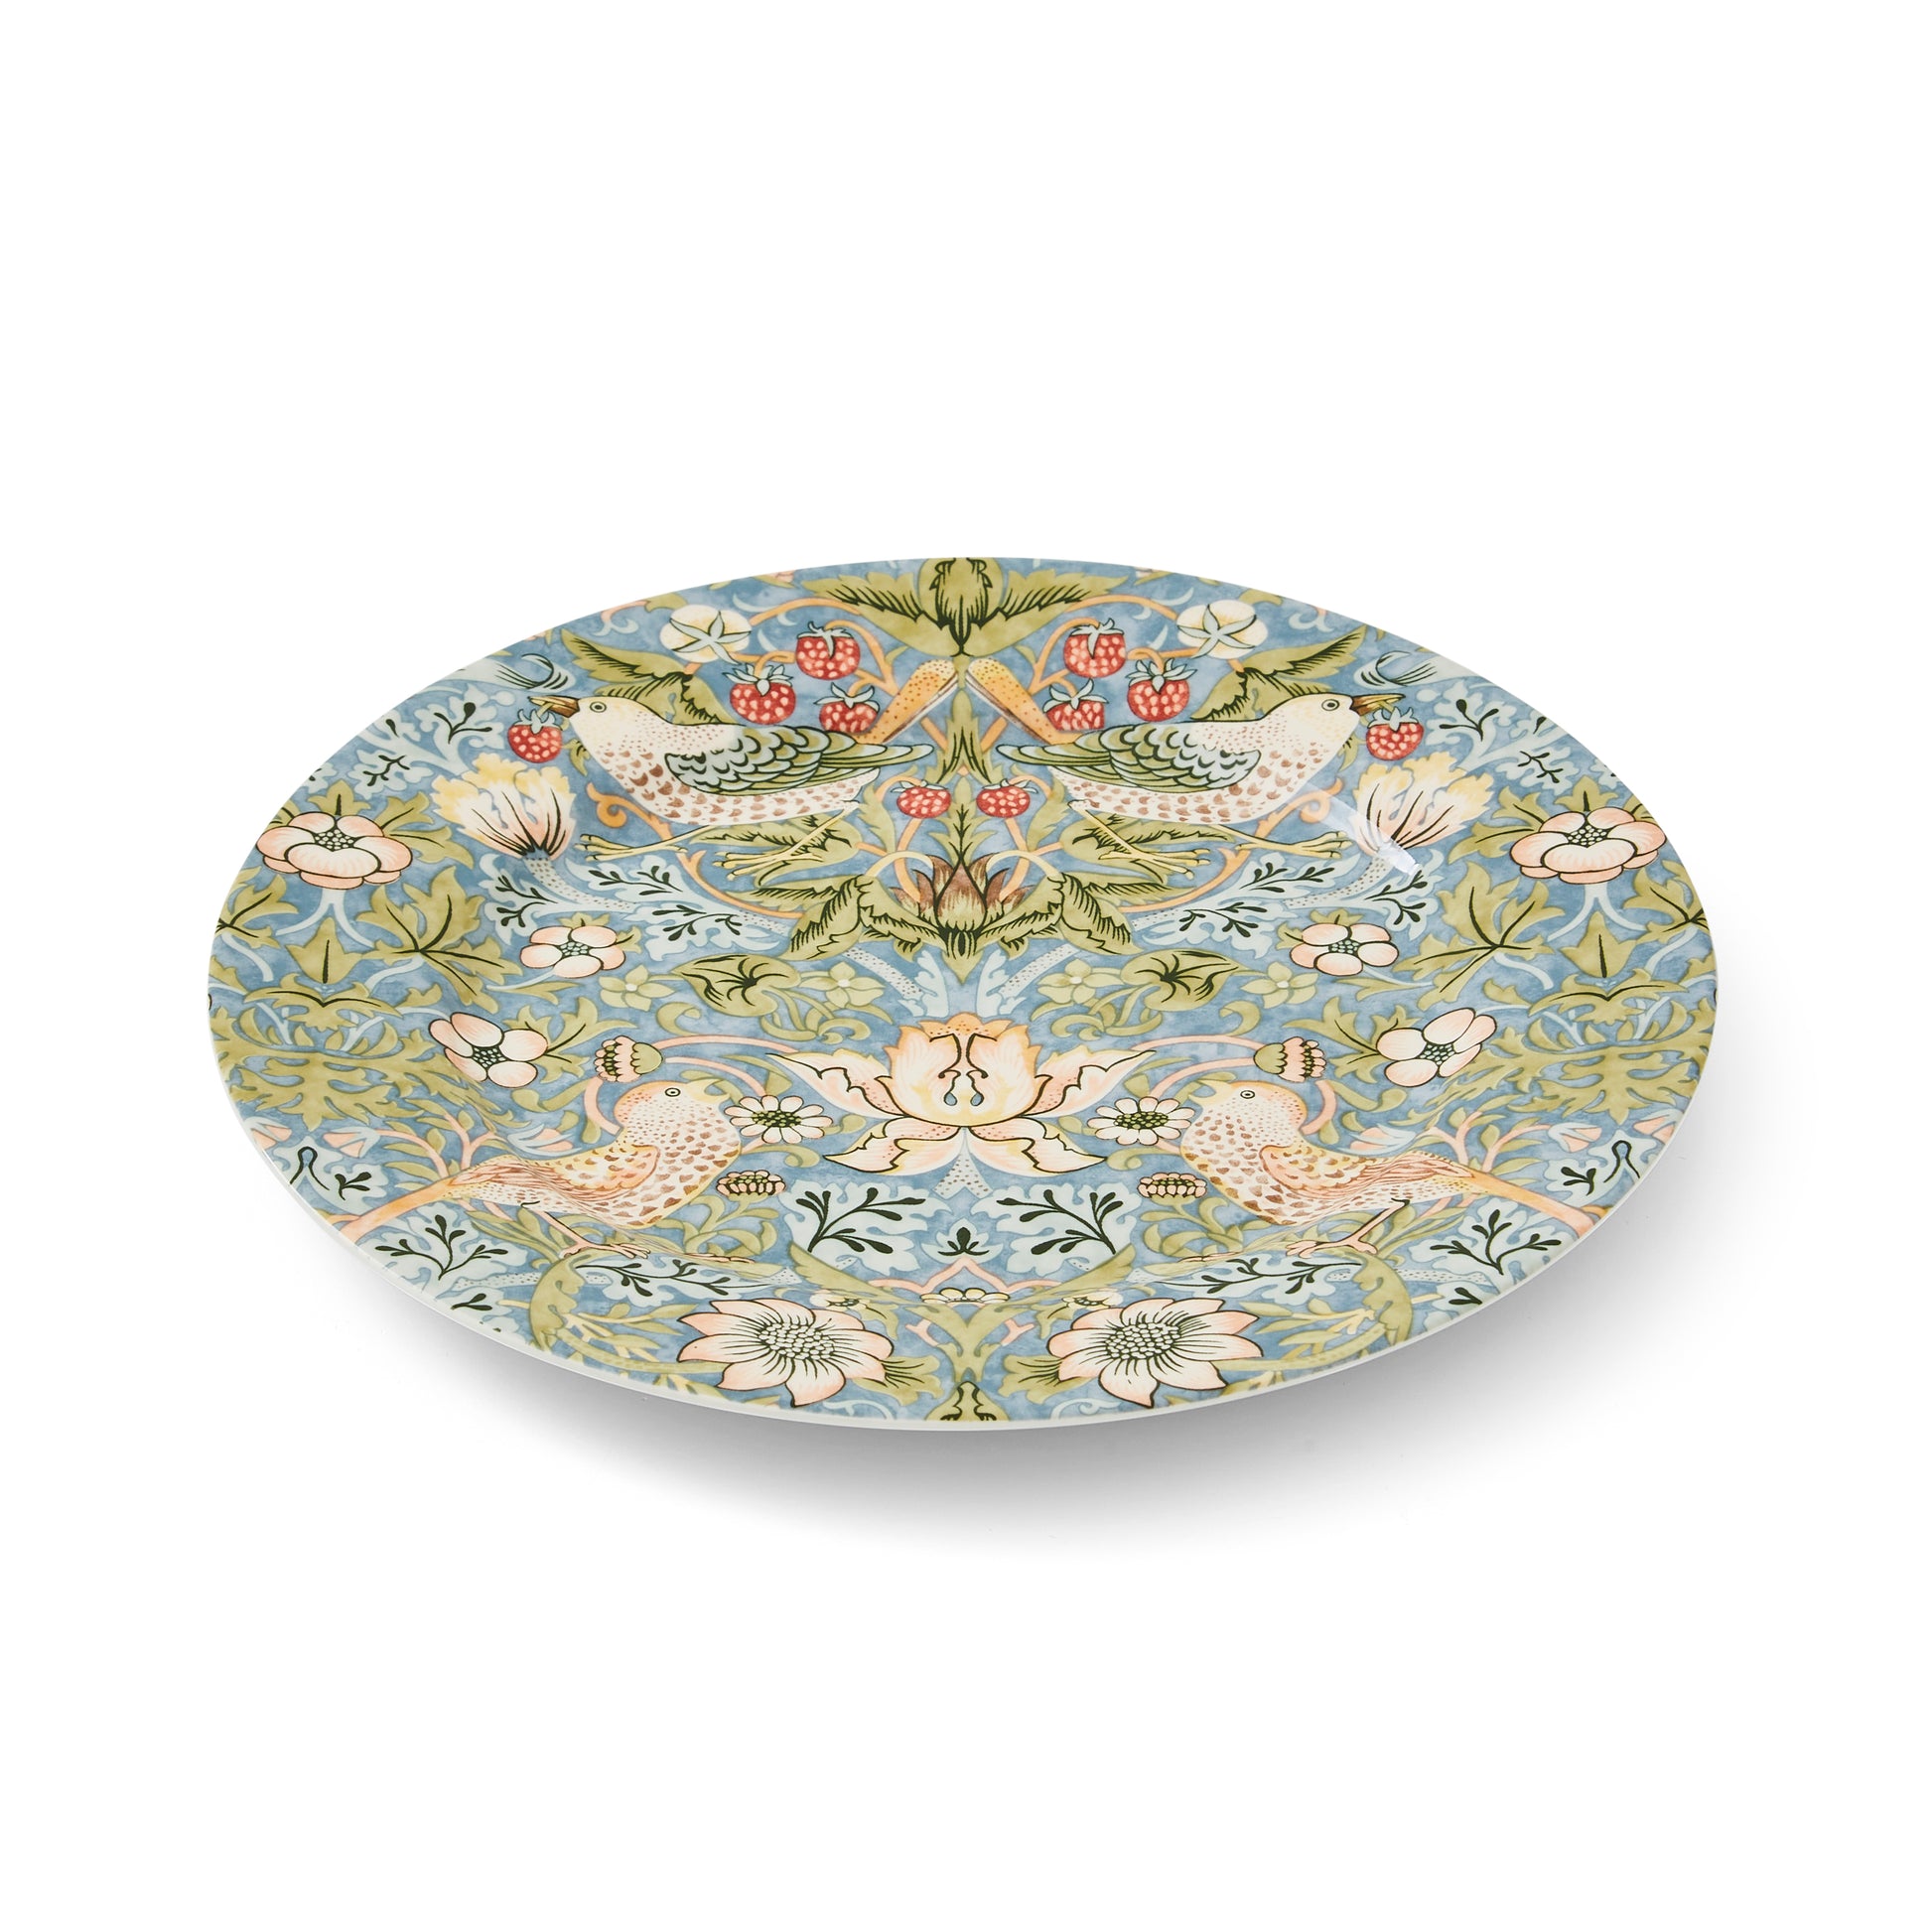 strawberry thief patterned dessert plate against a white background